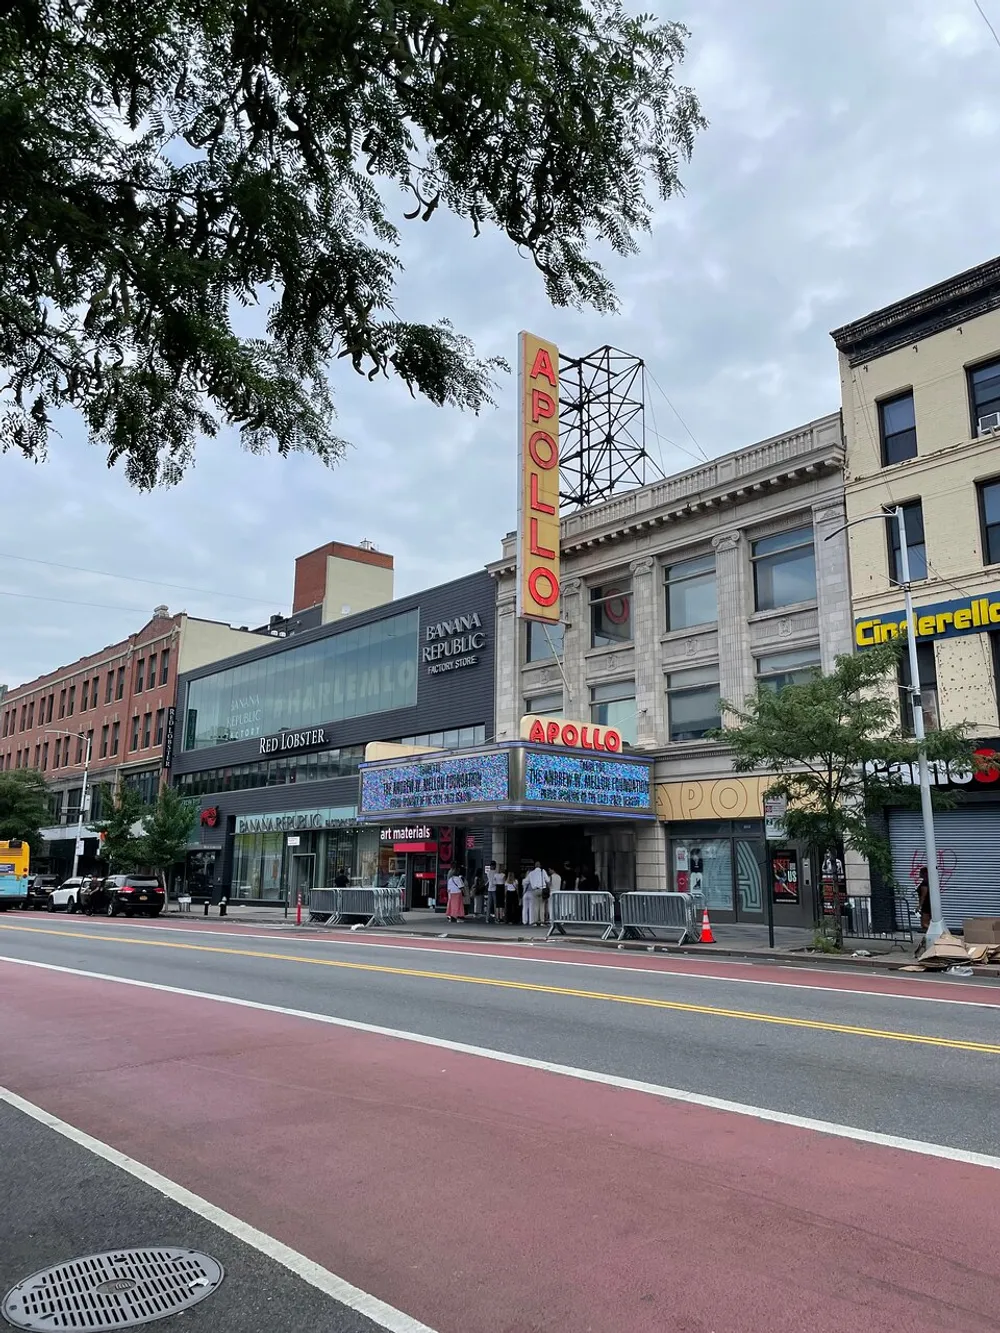 The image shows the iconic Apollo Theater with its notable neon sign located on a city street with pedestrians and various storefronts under an overcast sky